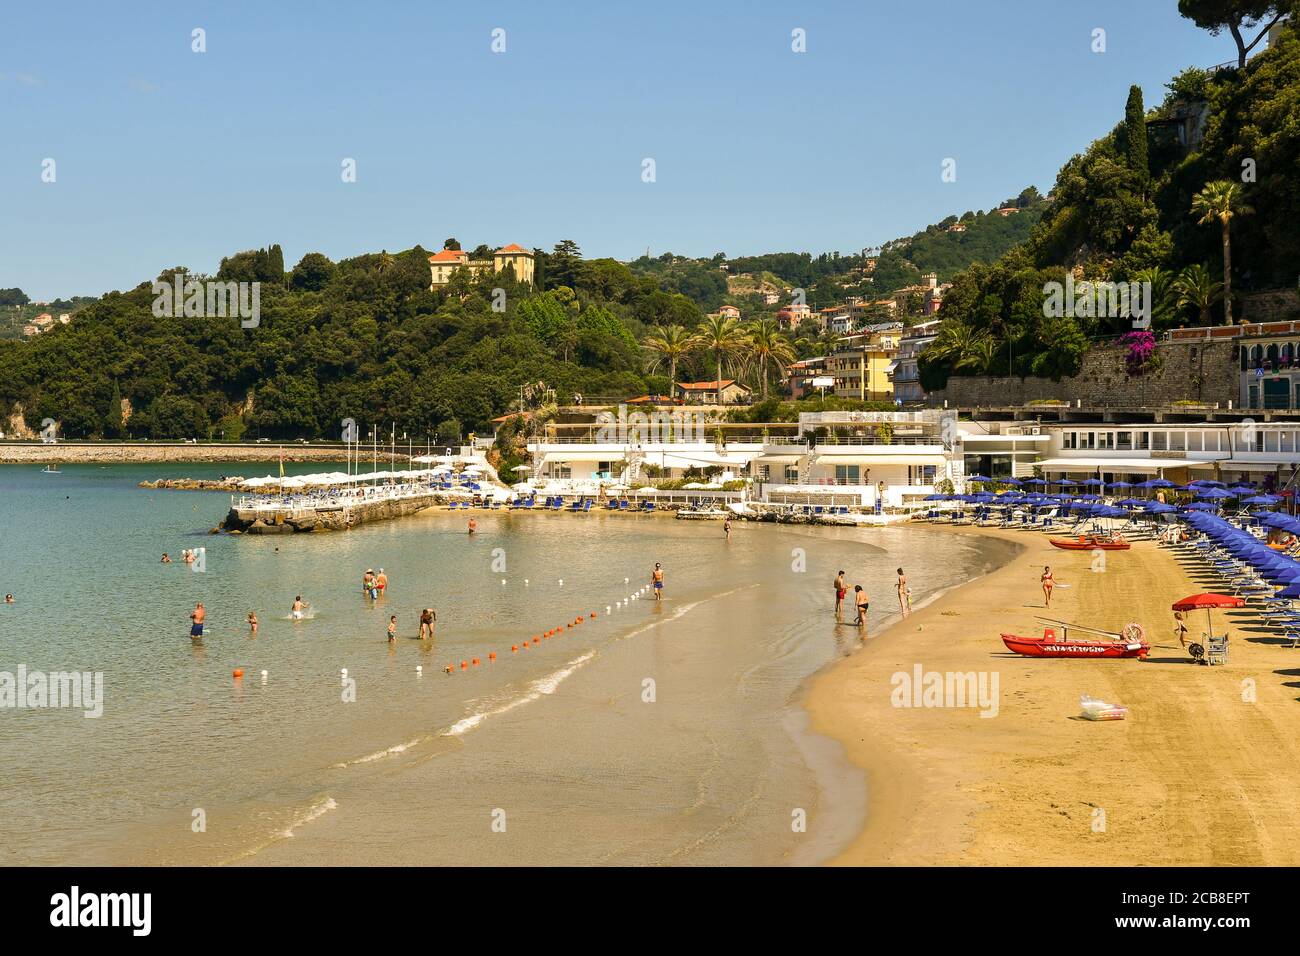 Elevated view of a sandy beach with vacationers in the waves of the shore and a wooded hill in the background in summer, Lerici, La Spezia, Italy Stock Photo